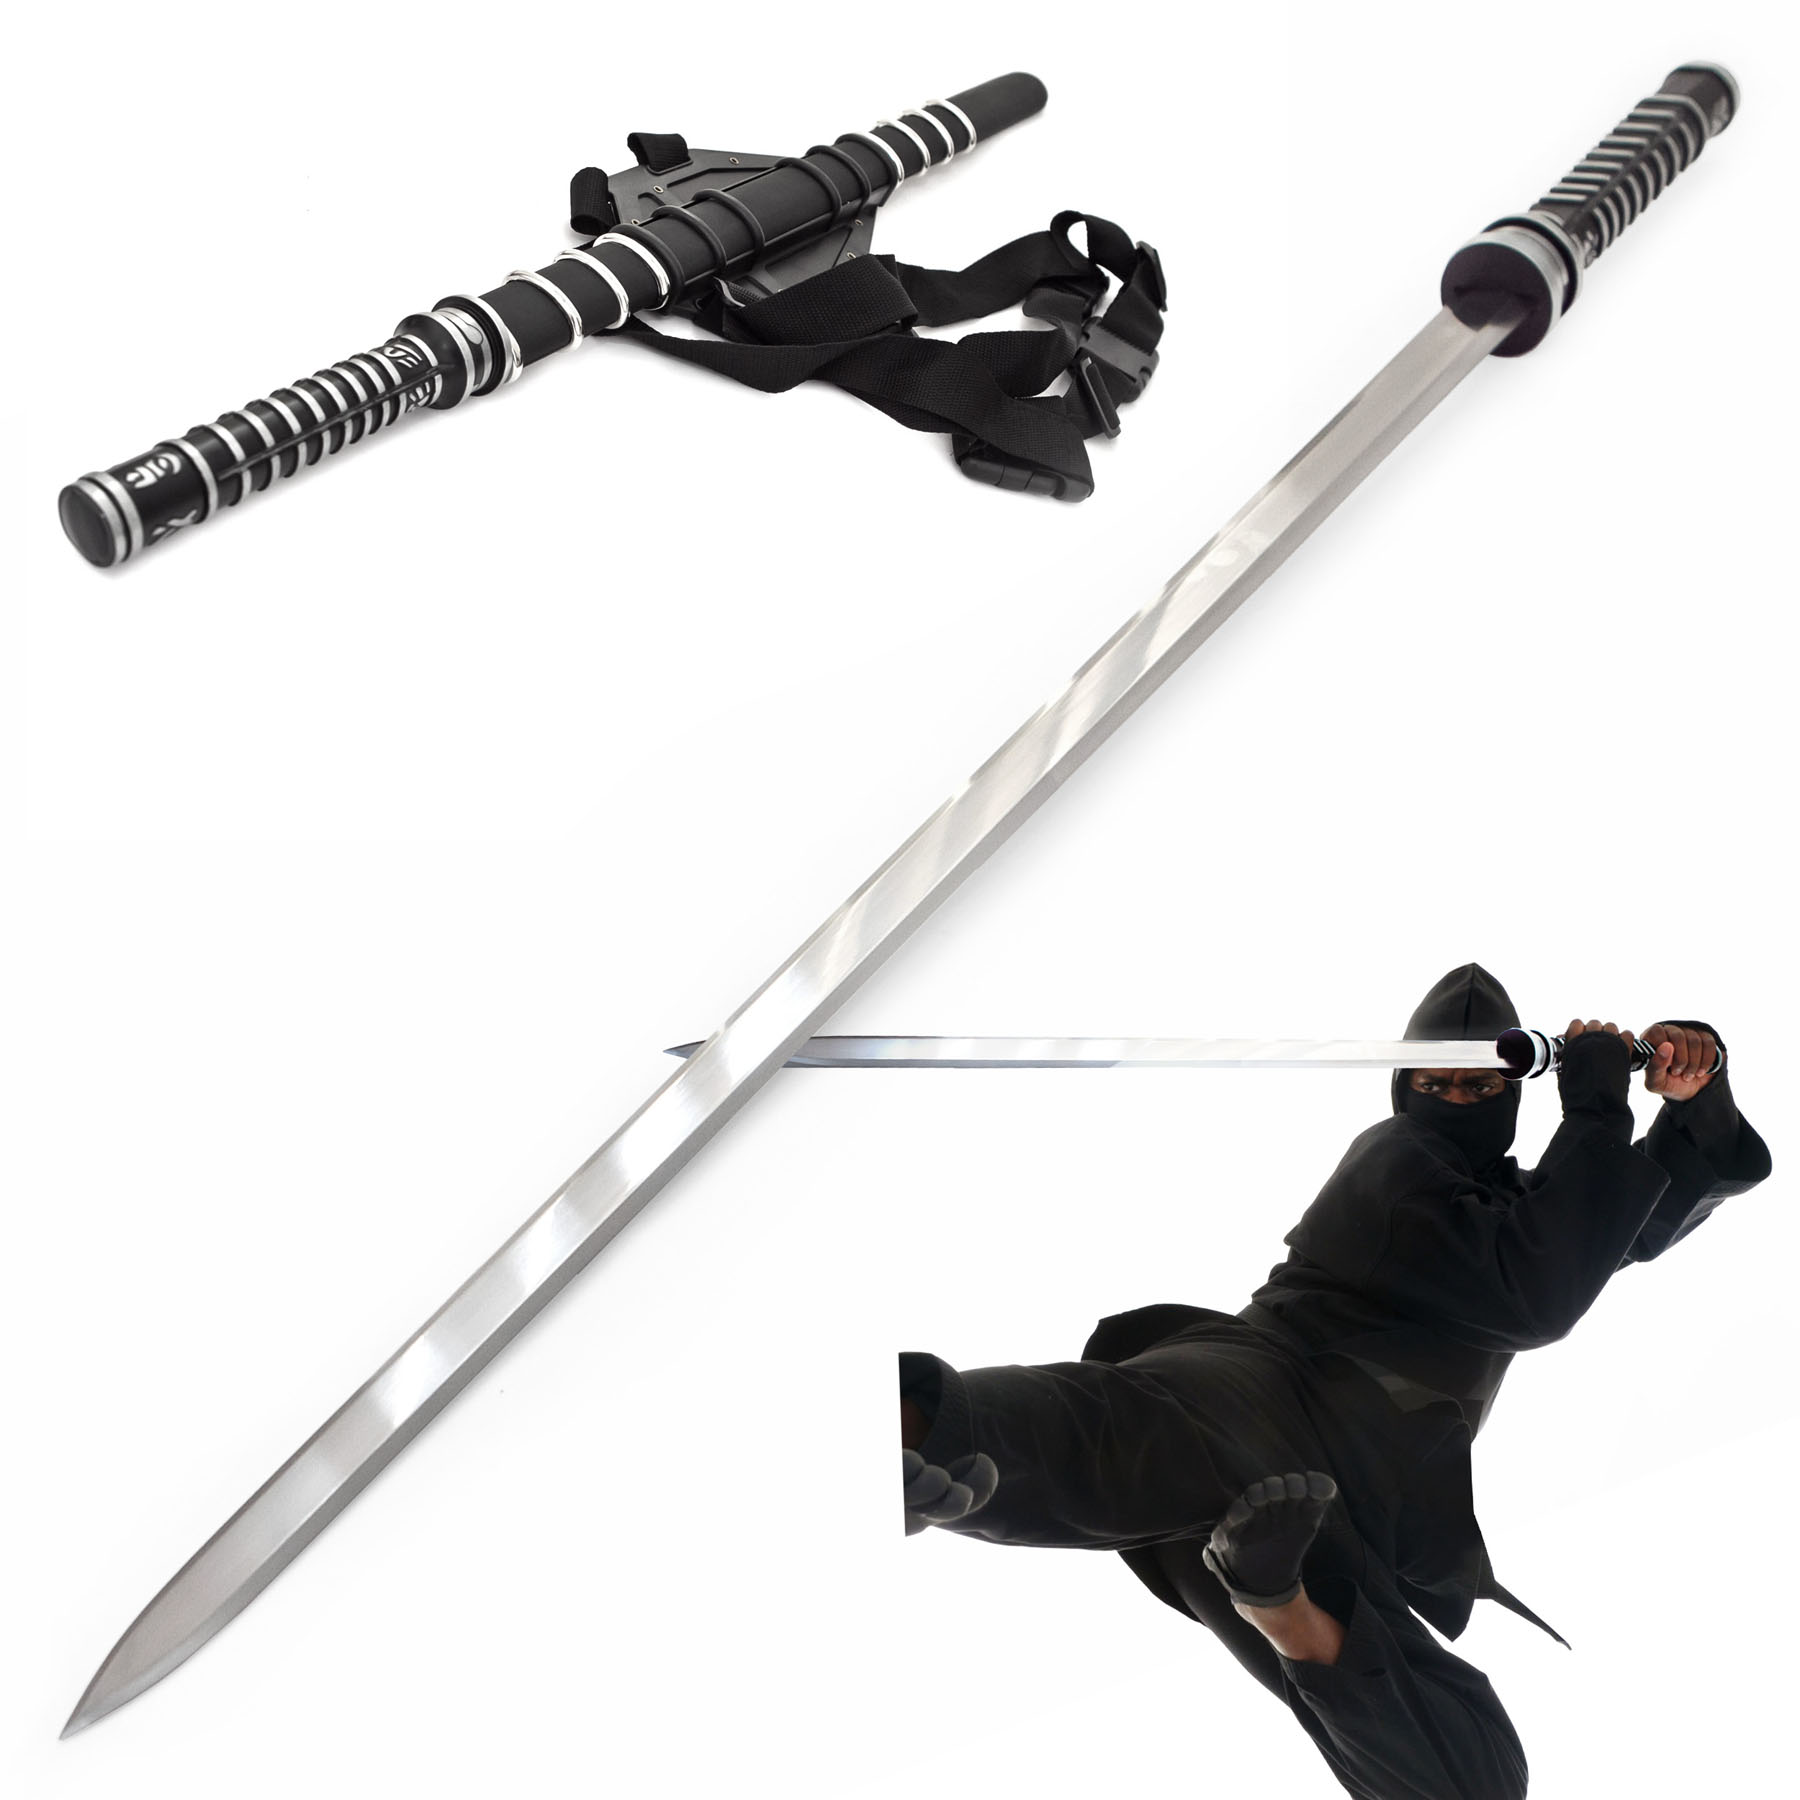 Blade sword with scabbard - handforged